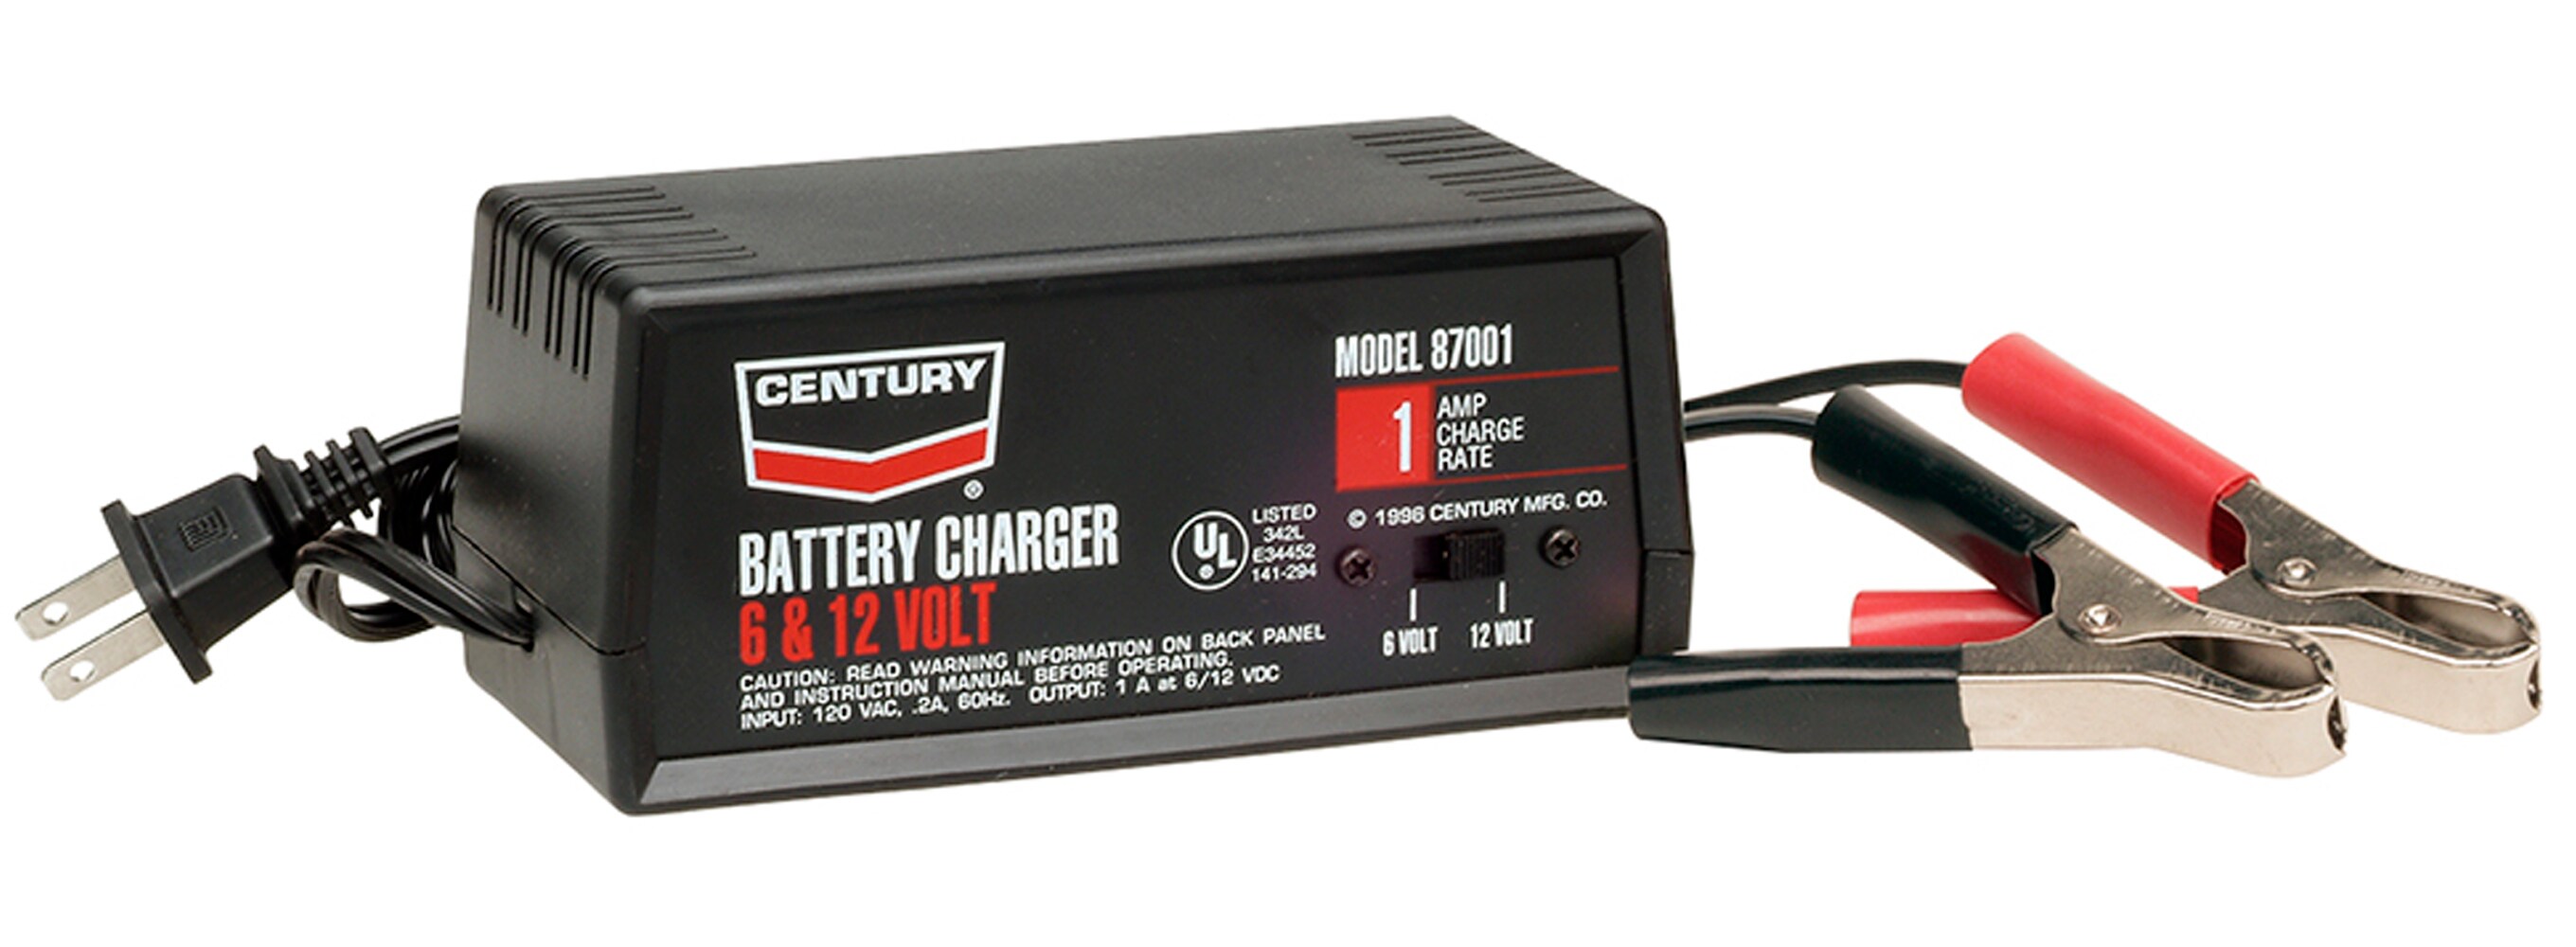 Century 12-Volt Battery Charger at 